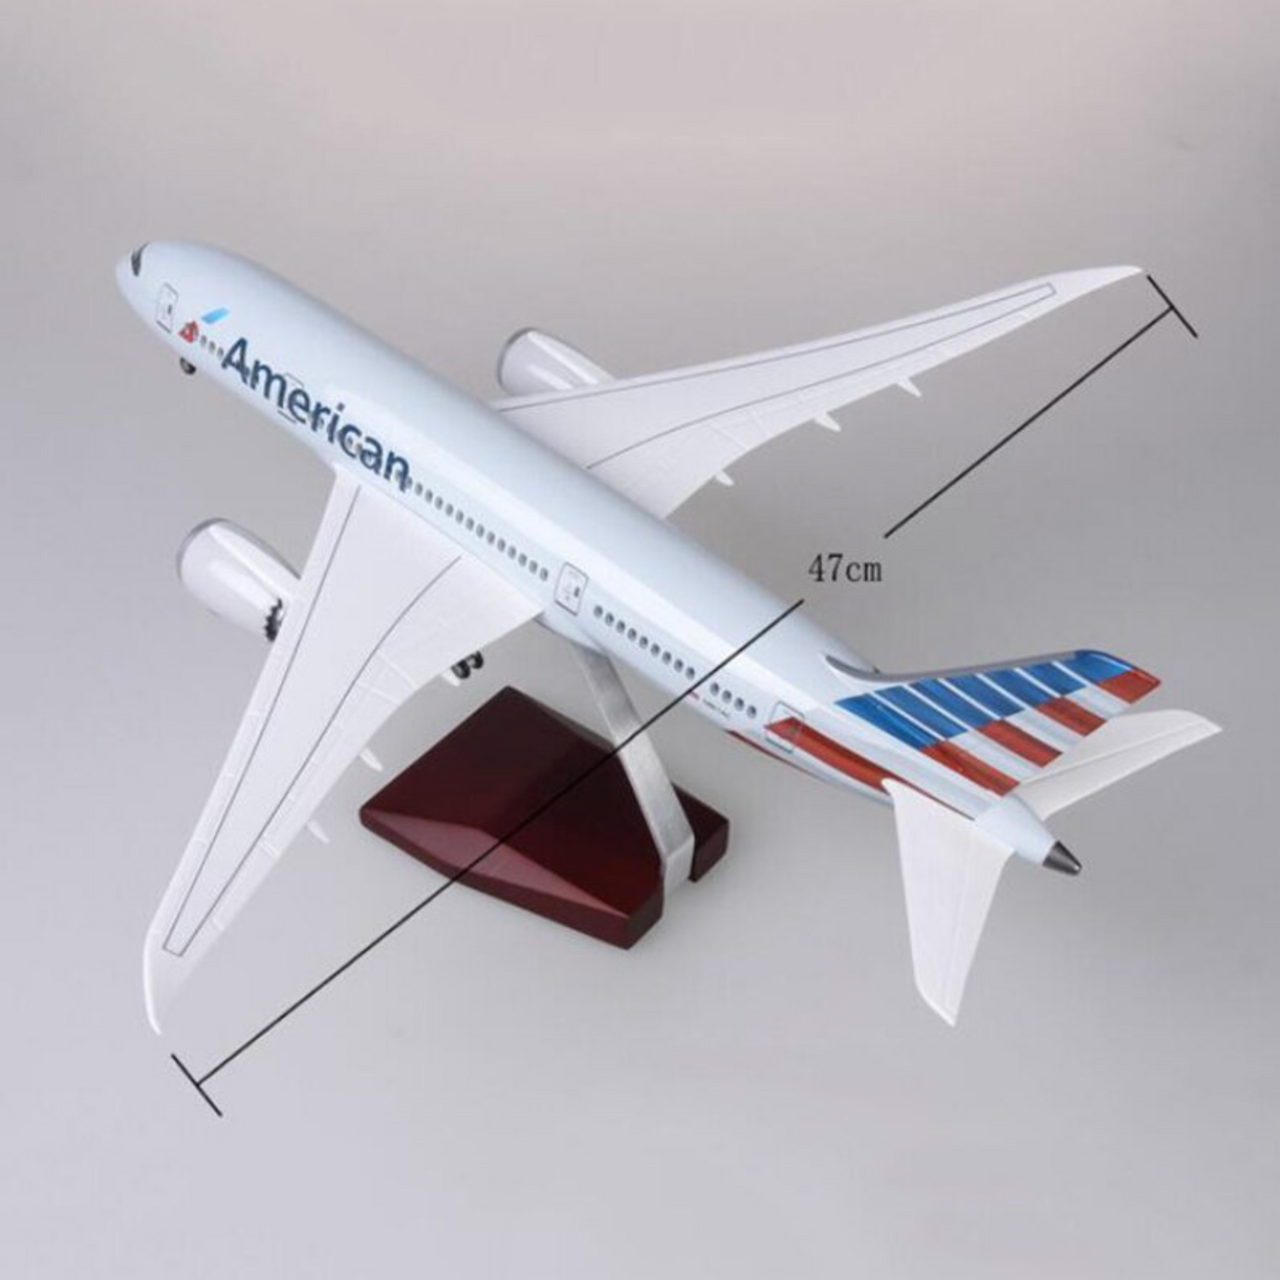 American Airlines Boeing 787 Airplane Model (1/130 Scale)